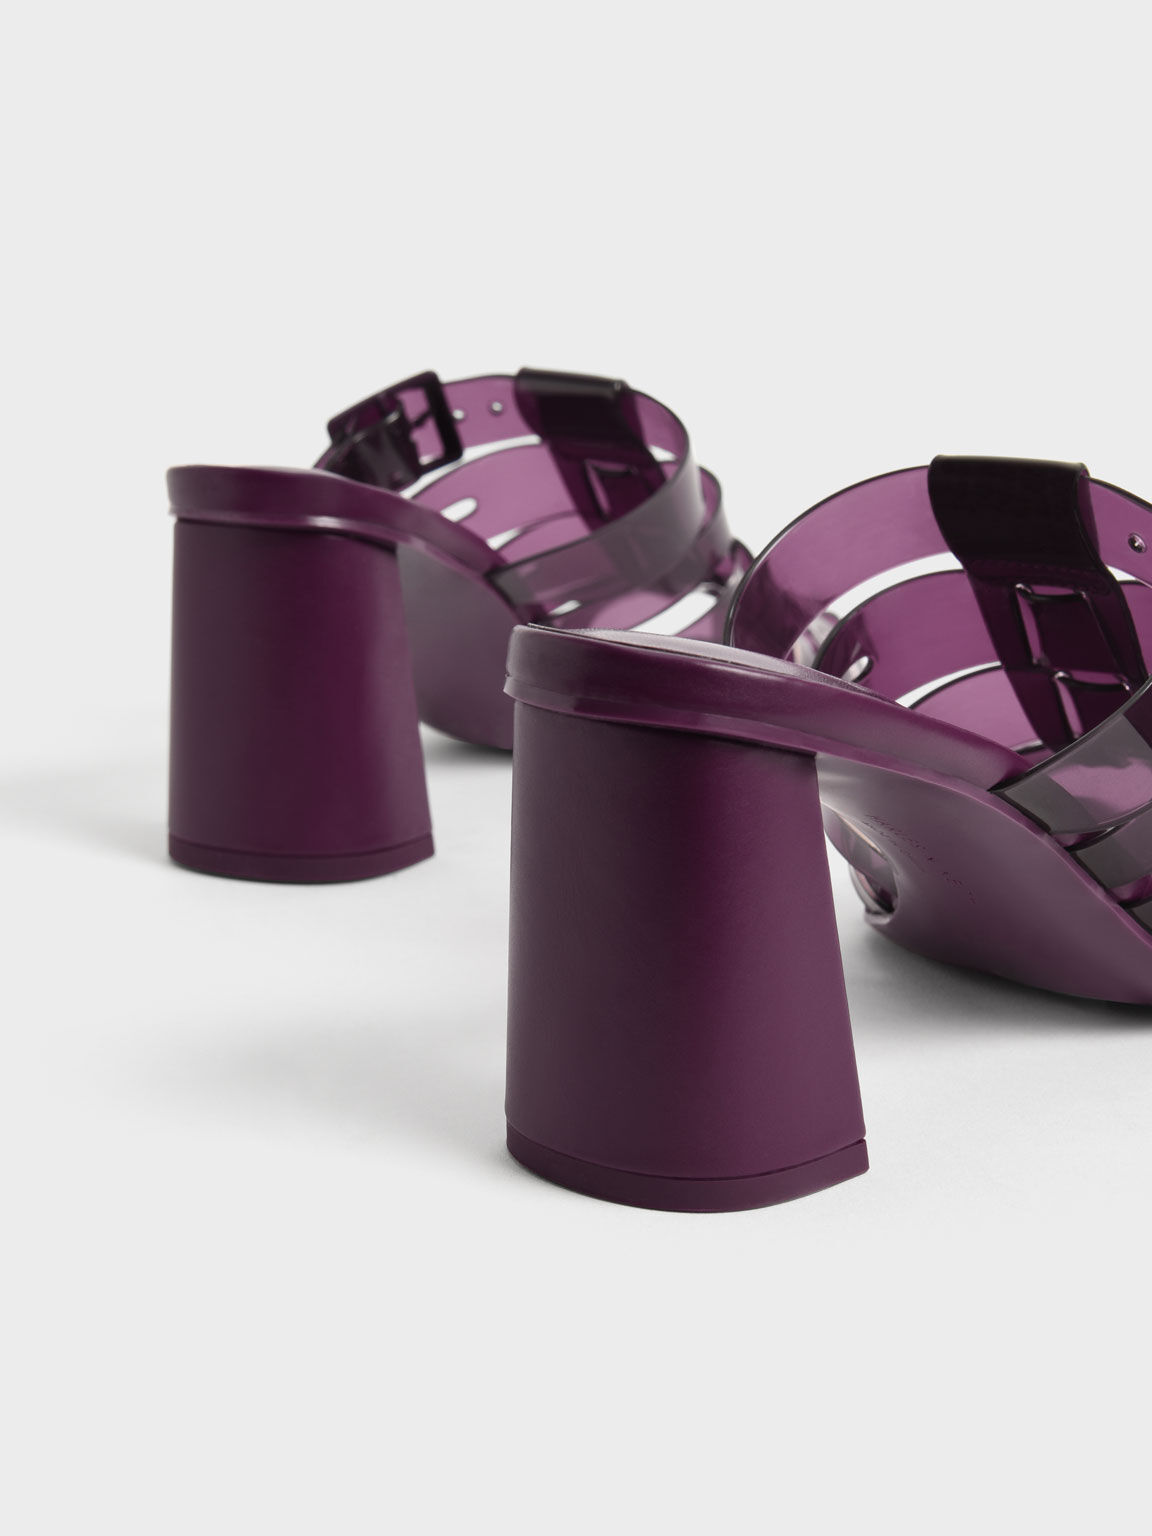 Madison See-Through Caged Mules, Purple, hi-res